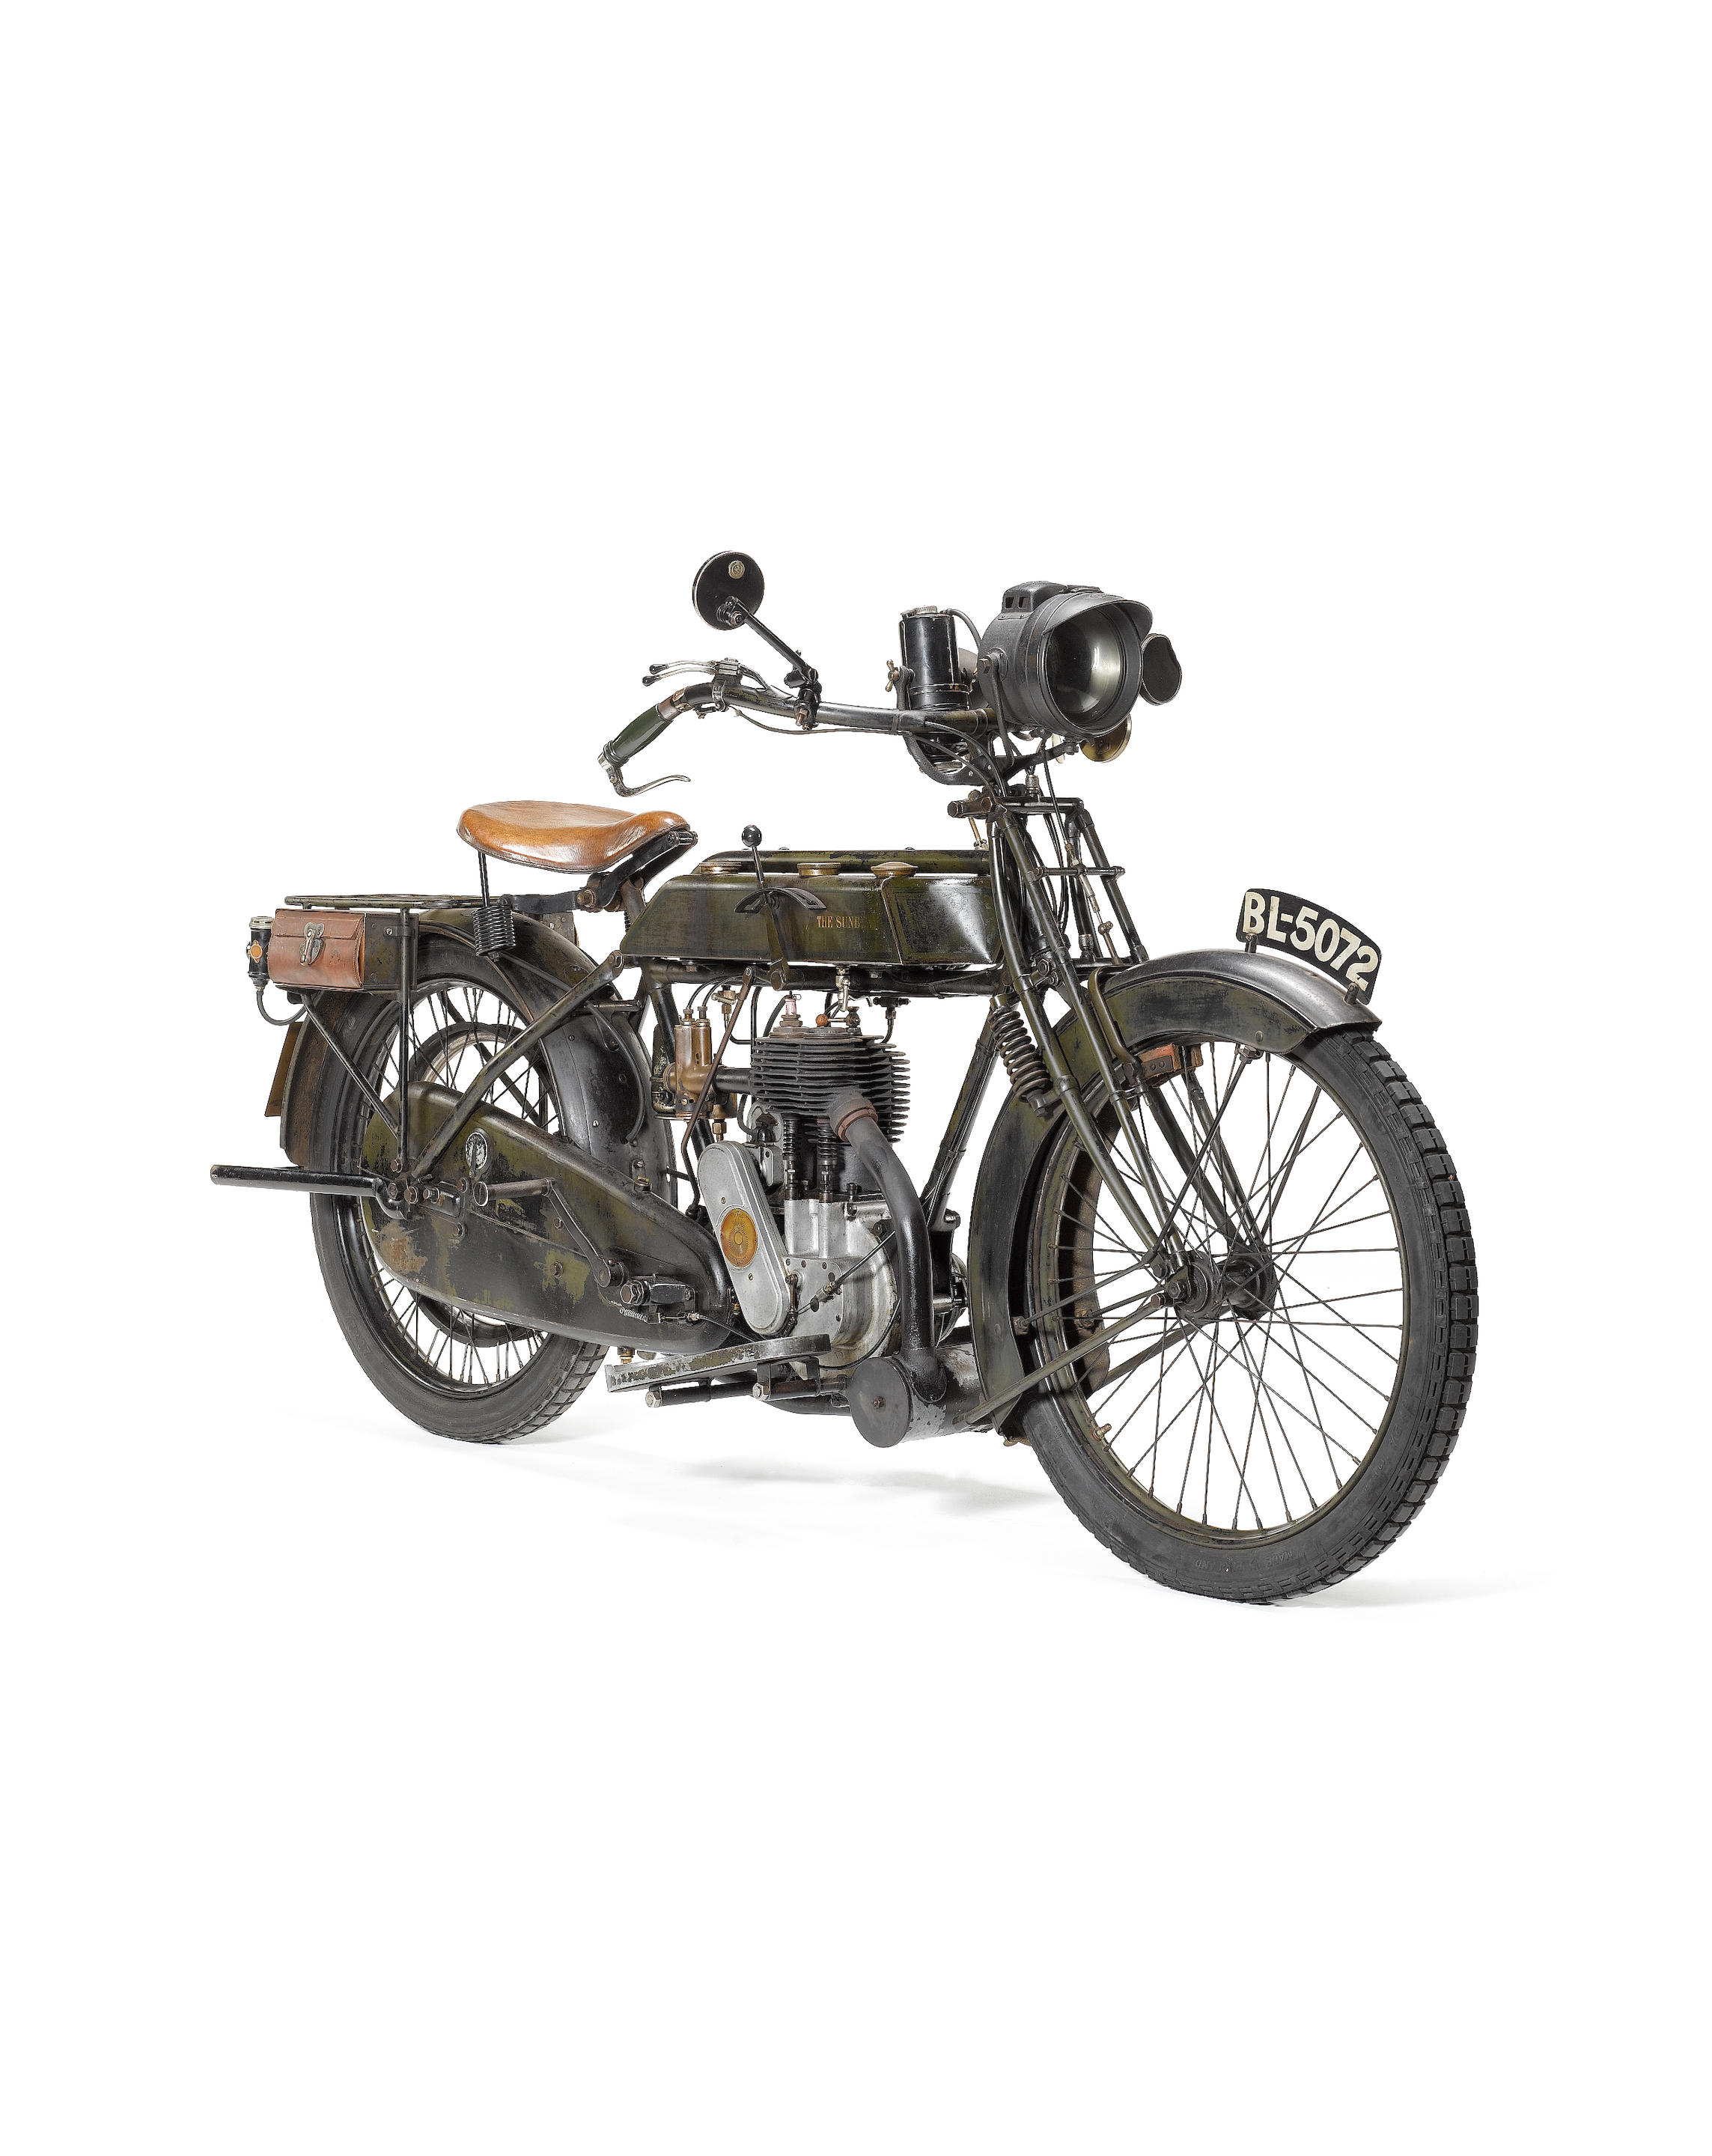 1916 Sunbeam 3½hp Military Motorcycle Registration no. BL 5072 Frame no...